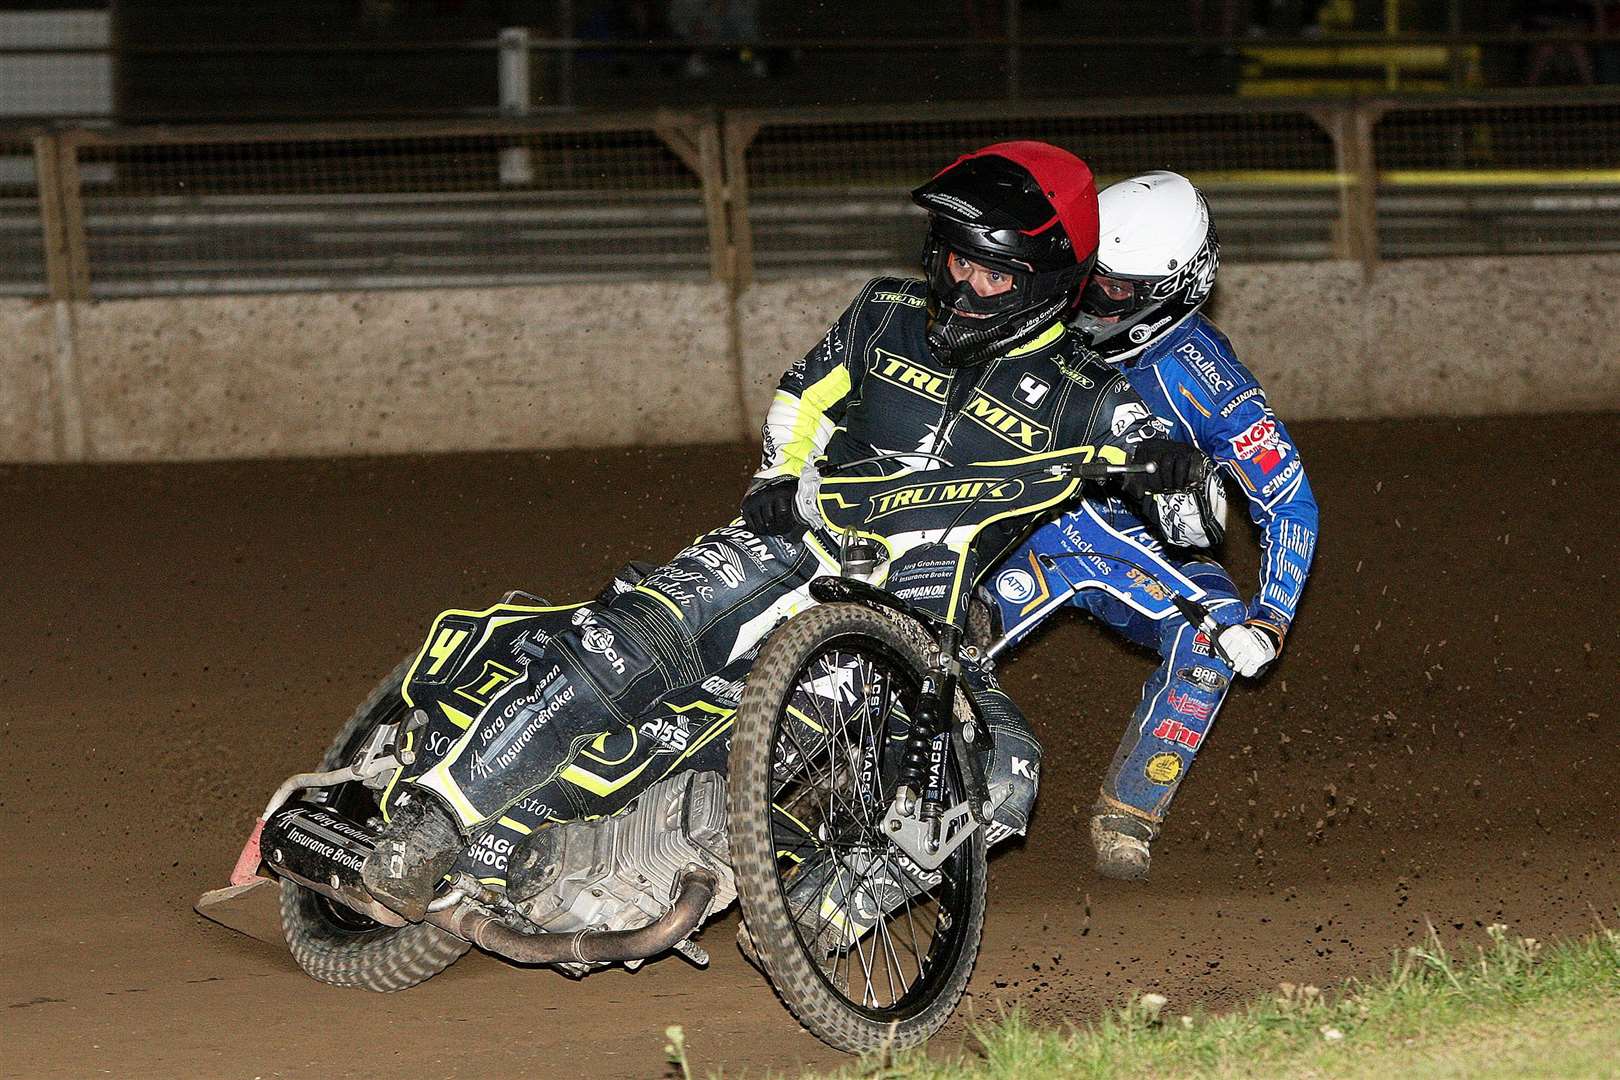 Erik Riss leads Nicolai Klindt at Foxhall last week. Riss has returned to form this season after illness, while Klindt’s season is over after an awful crash in Poland at the weekend.. Picture: Phil Hilton